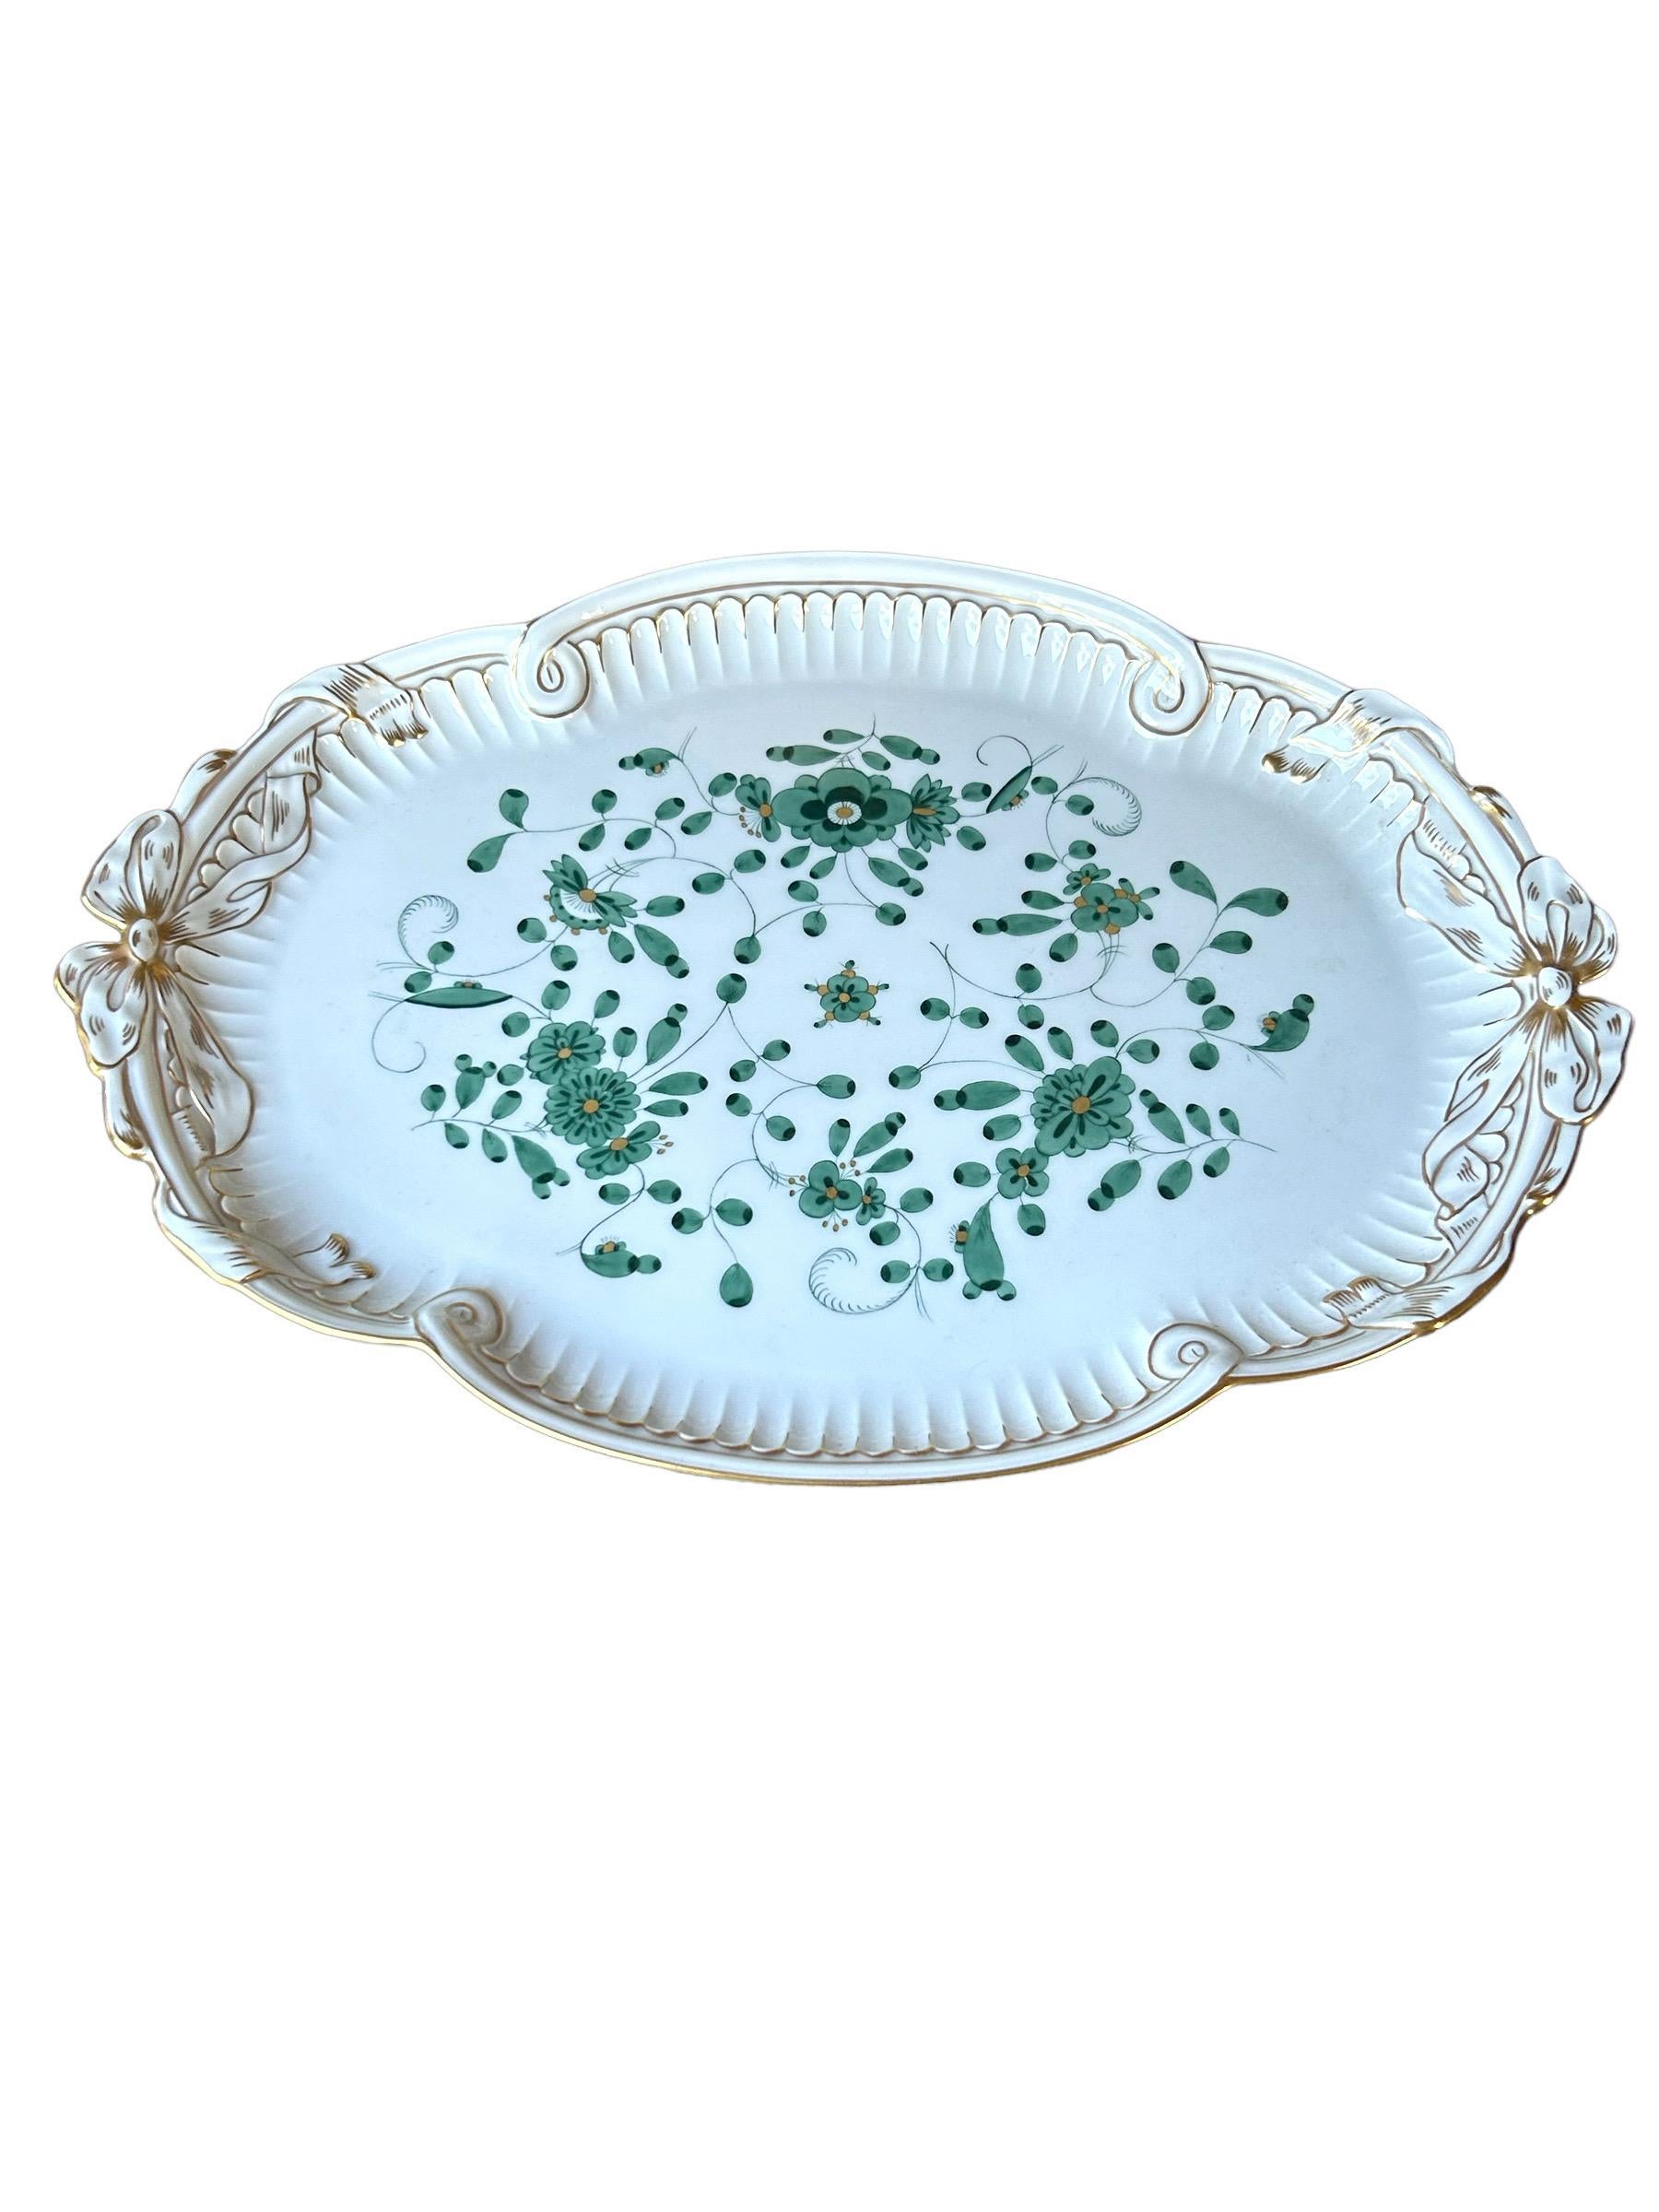 Meissen Serving Tray with Green Decorations and Gold Trim For Sale